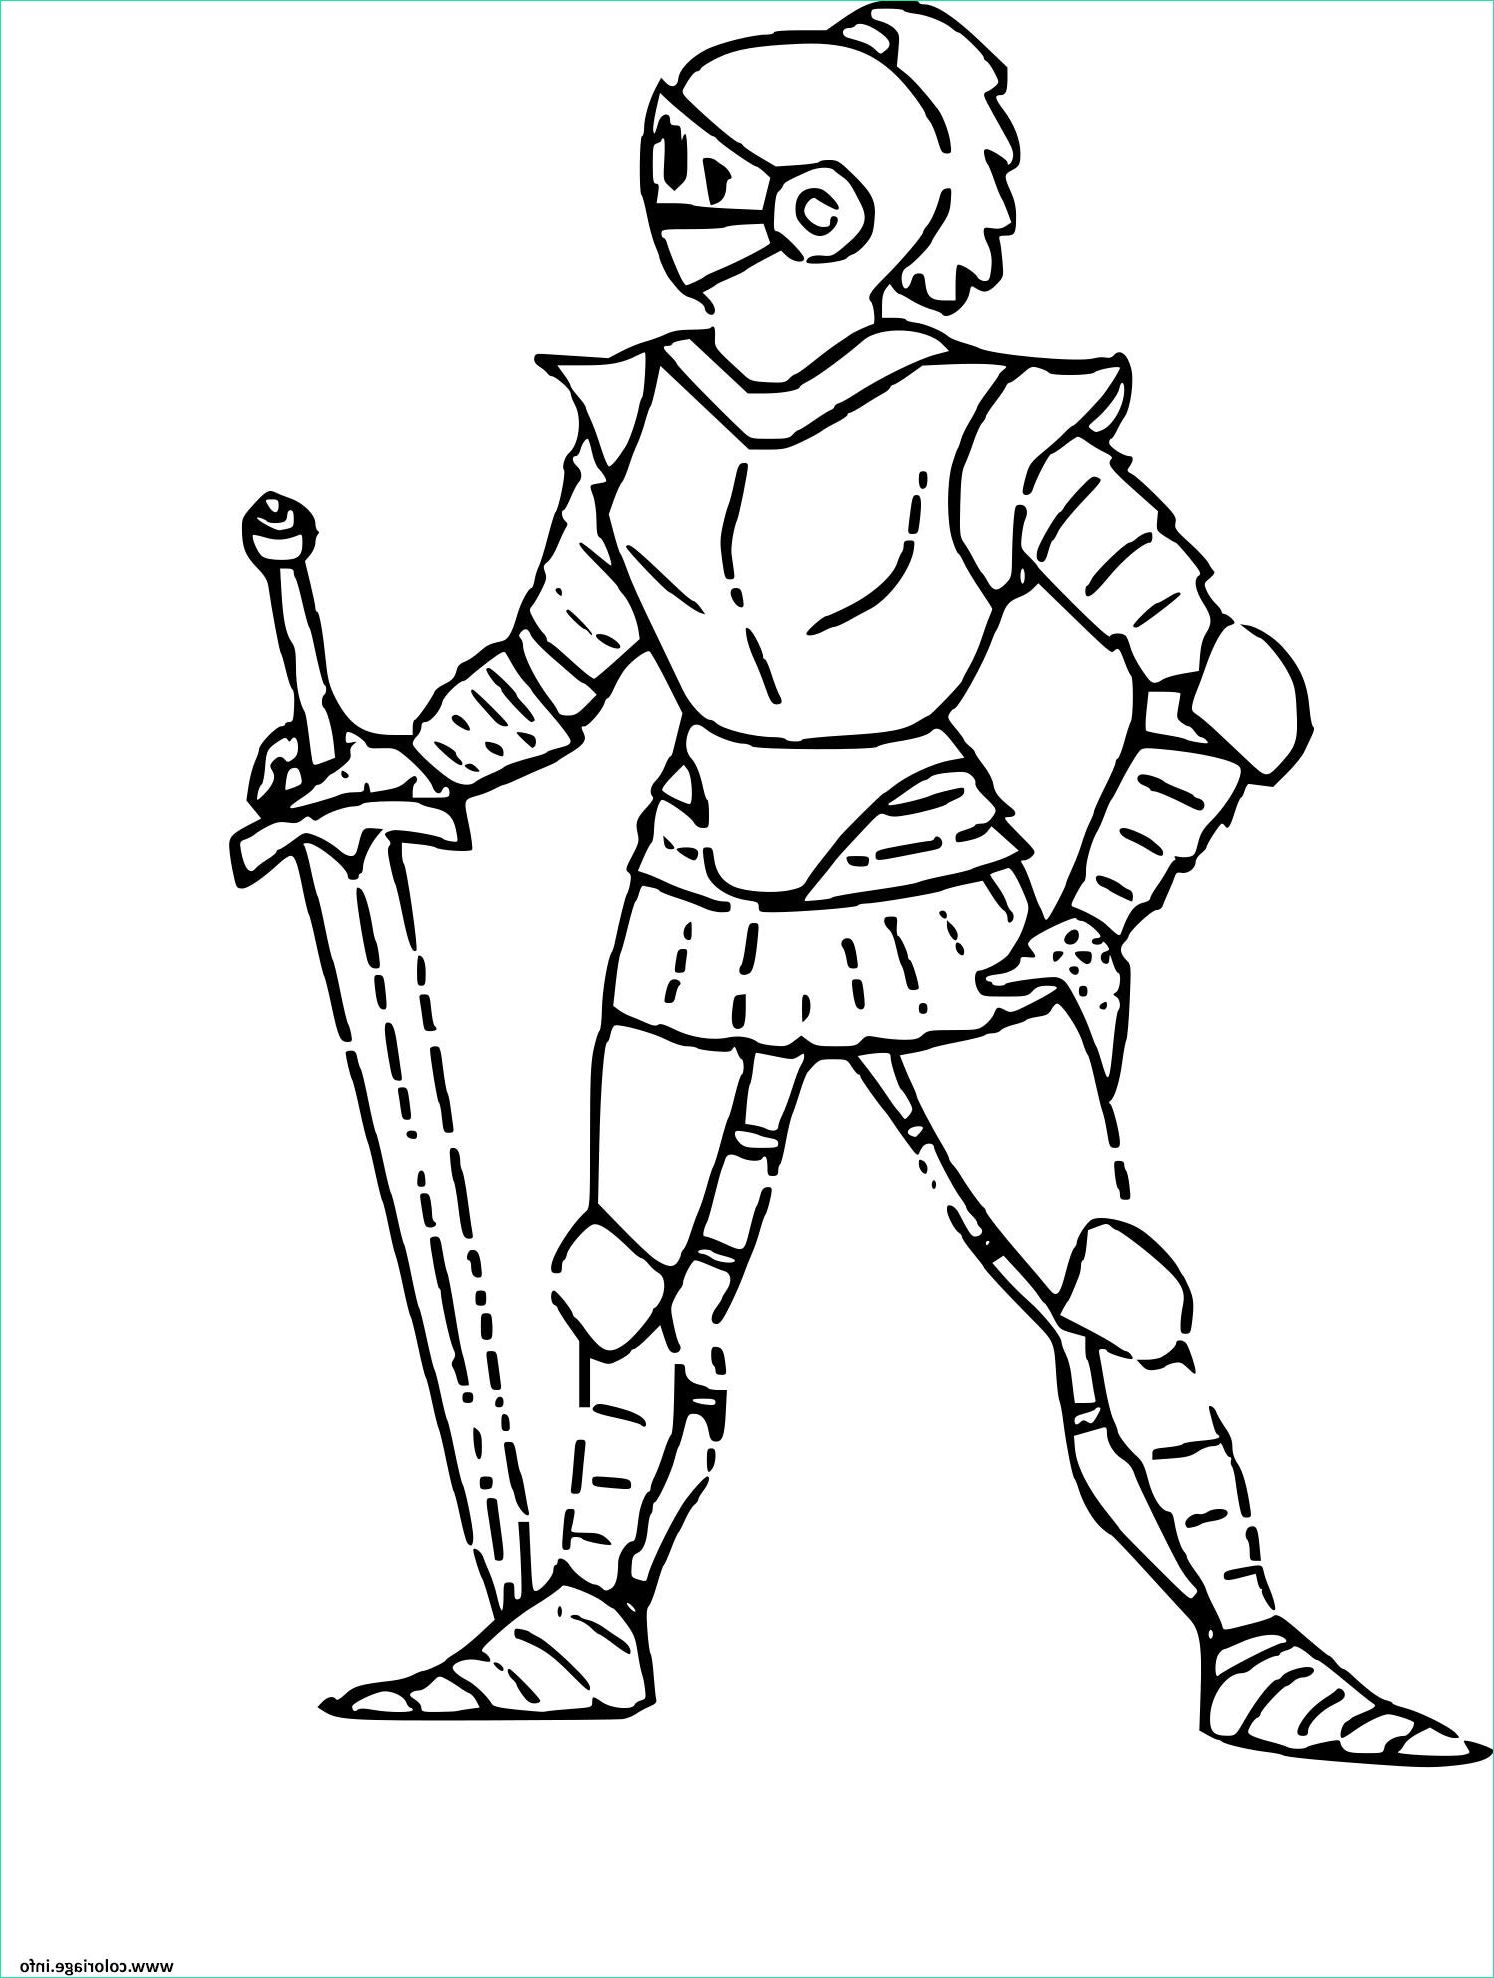 Coloriage Epee Beau Photos Coloriage Chevalier Et son Epee Dessin